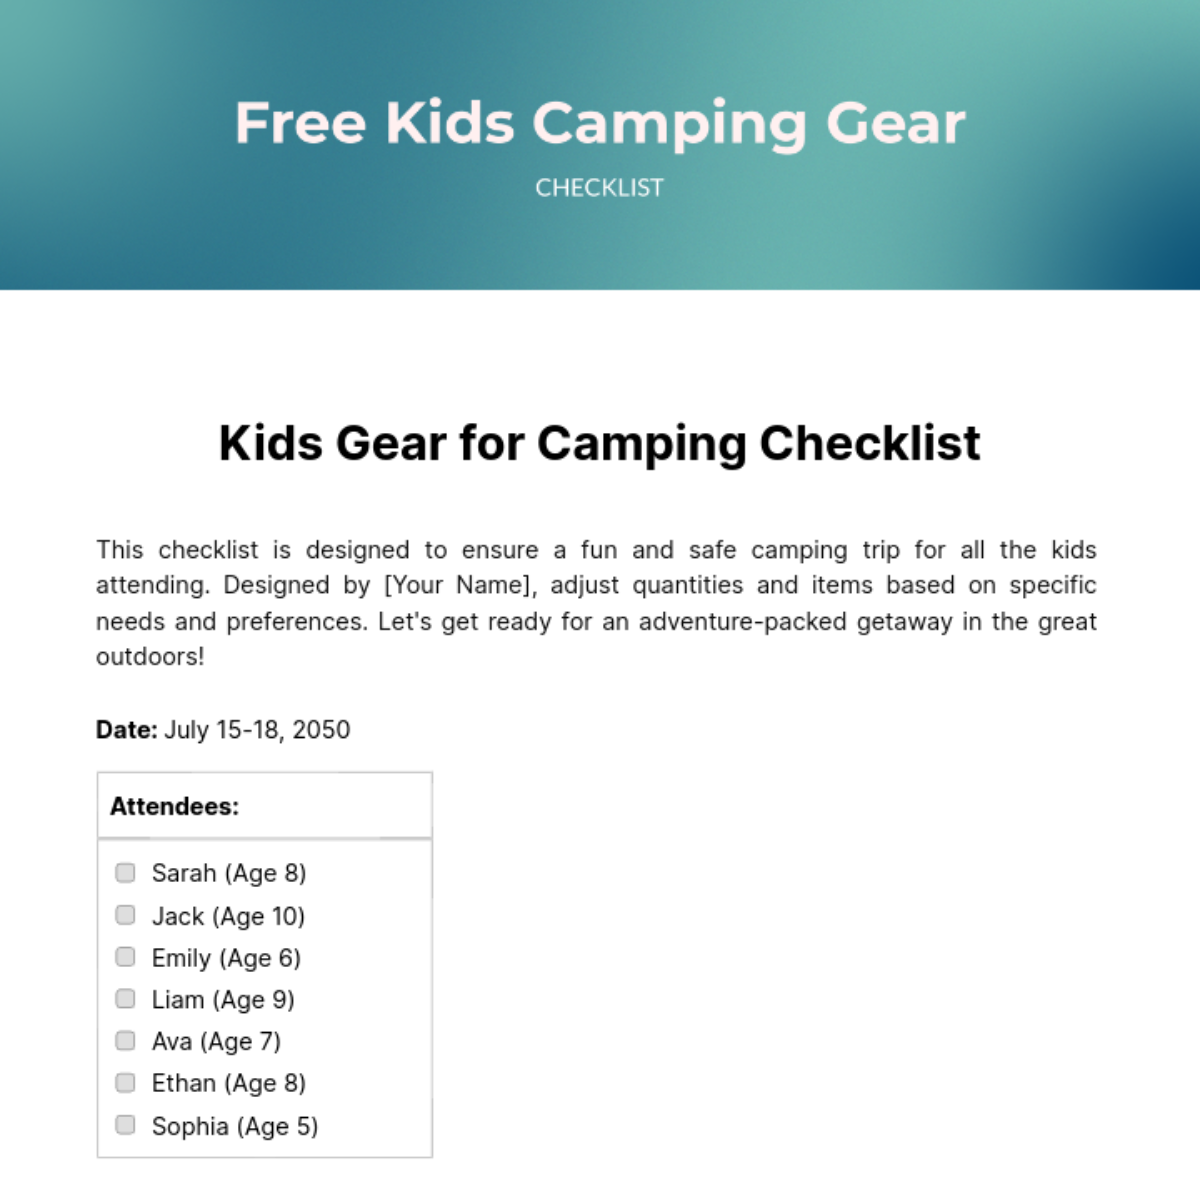 Free Kids Camping Gear Checklist Template